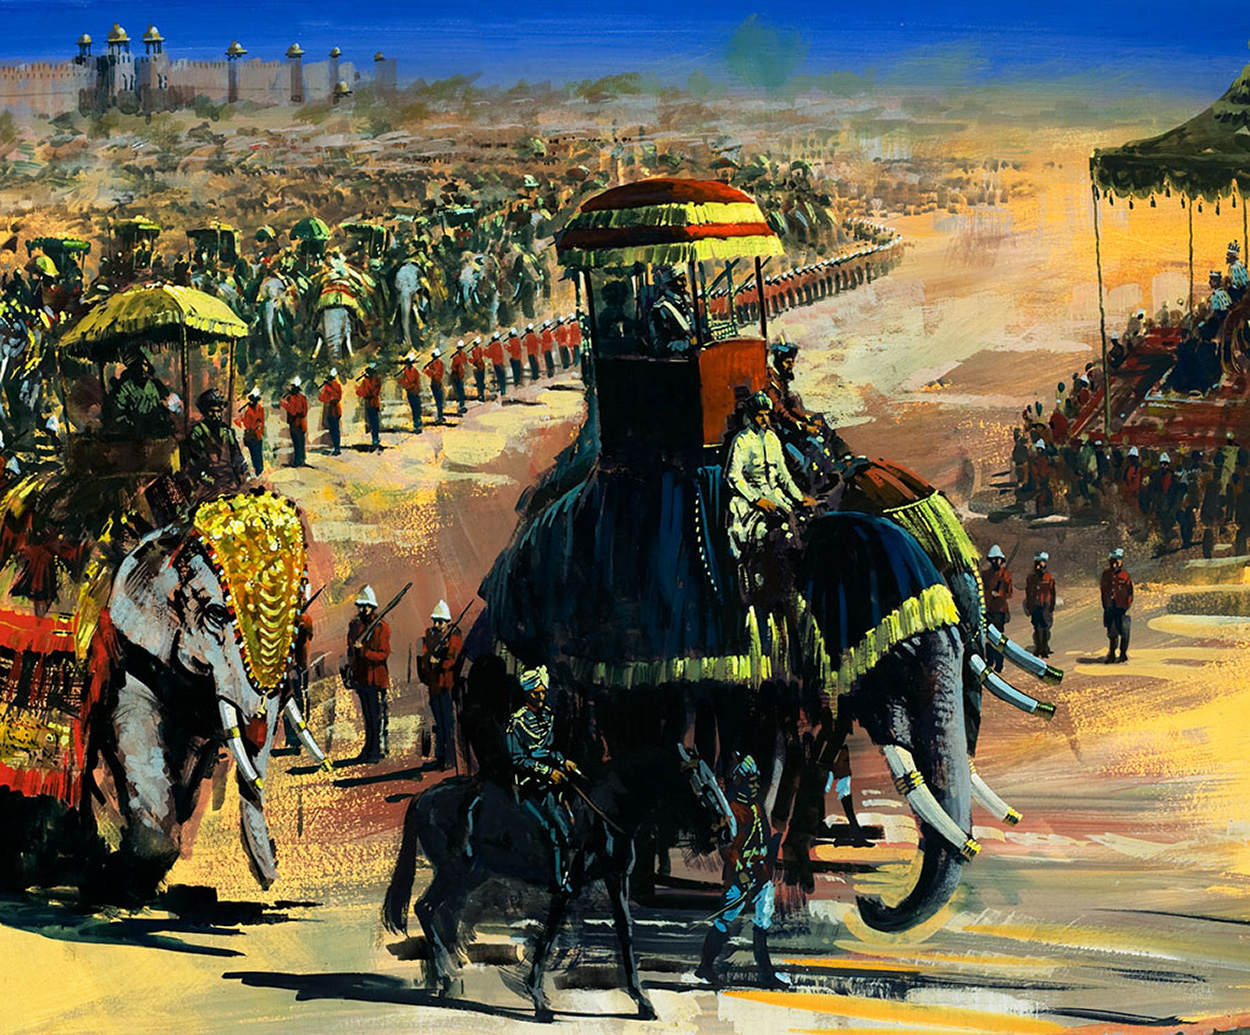 The Last Great Durbar in June 1911 (Original) art by Other Military Art (Coton) at The Illustration Art Gallery